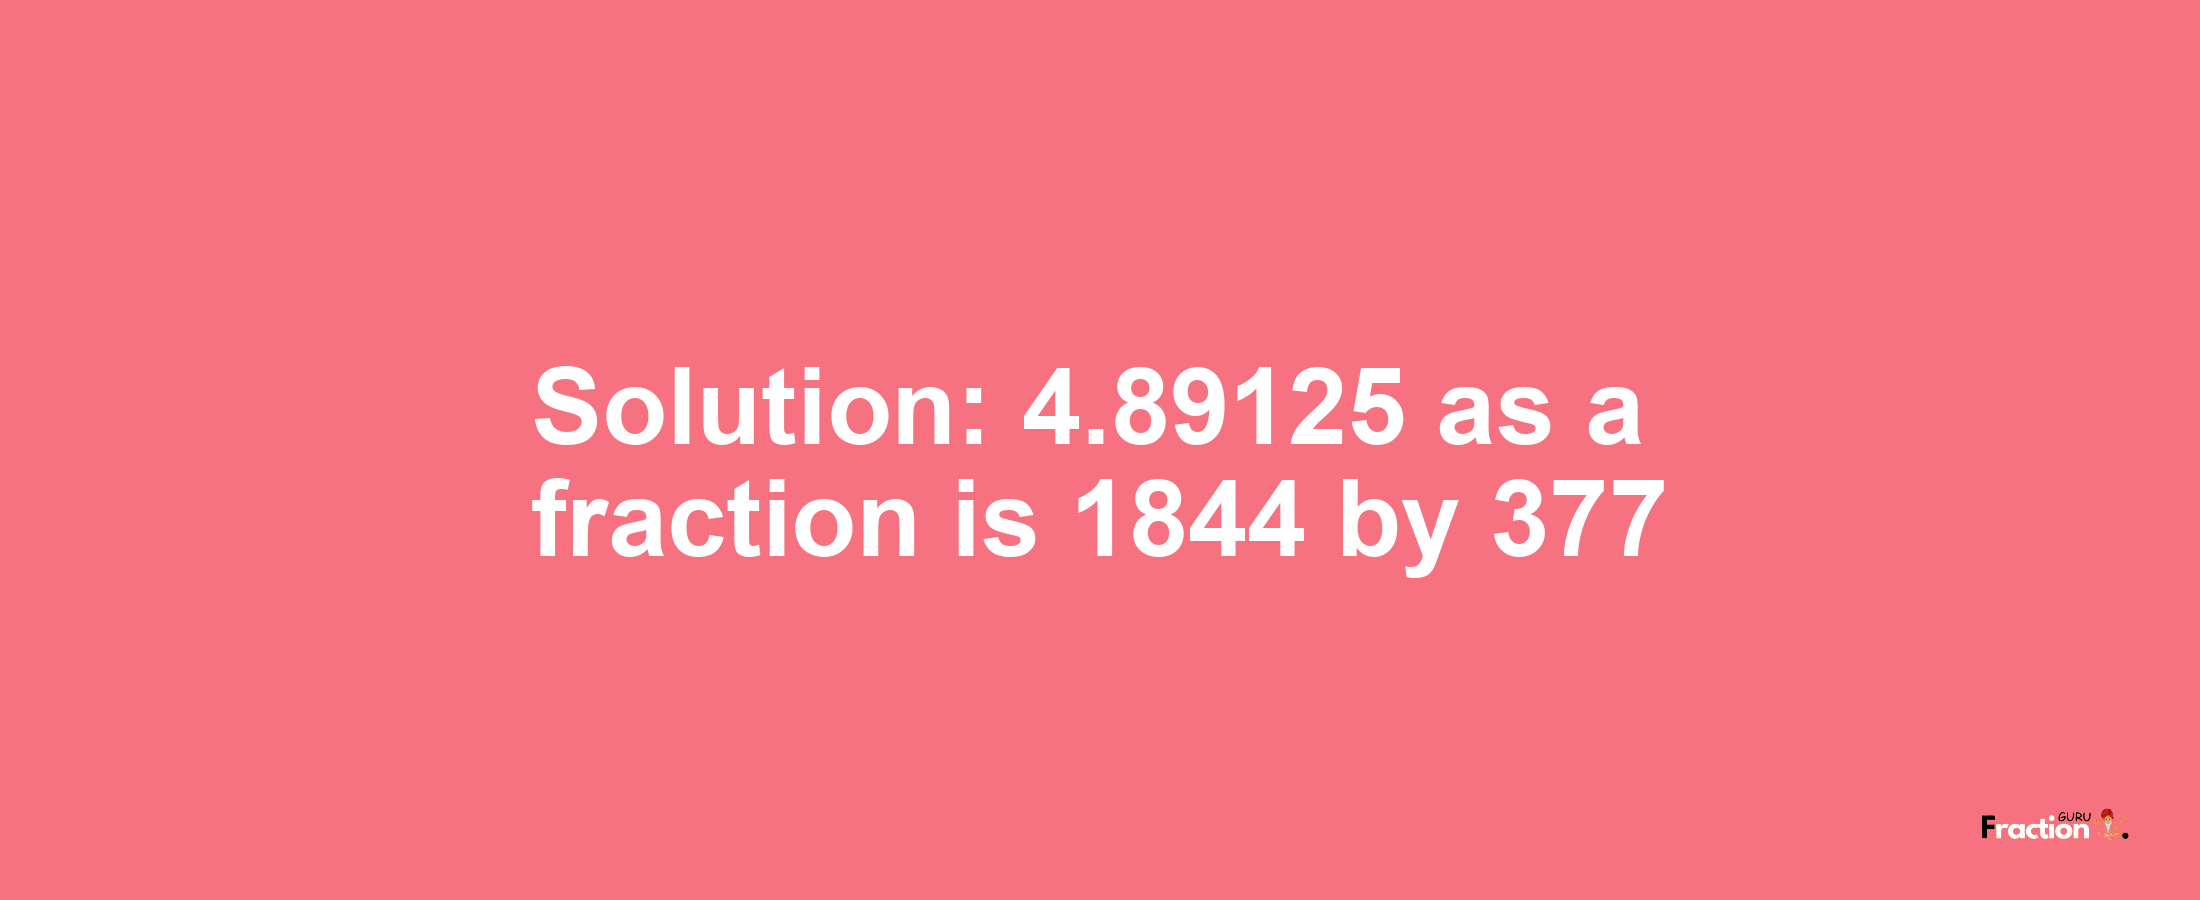 Solution:4.89125 as a fraction is 1844/377